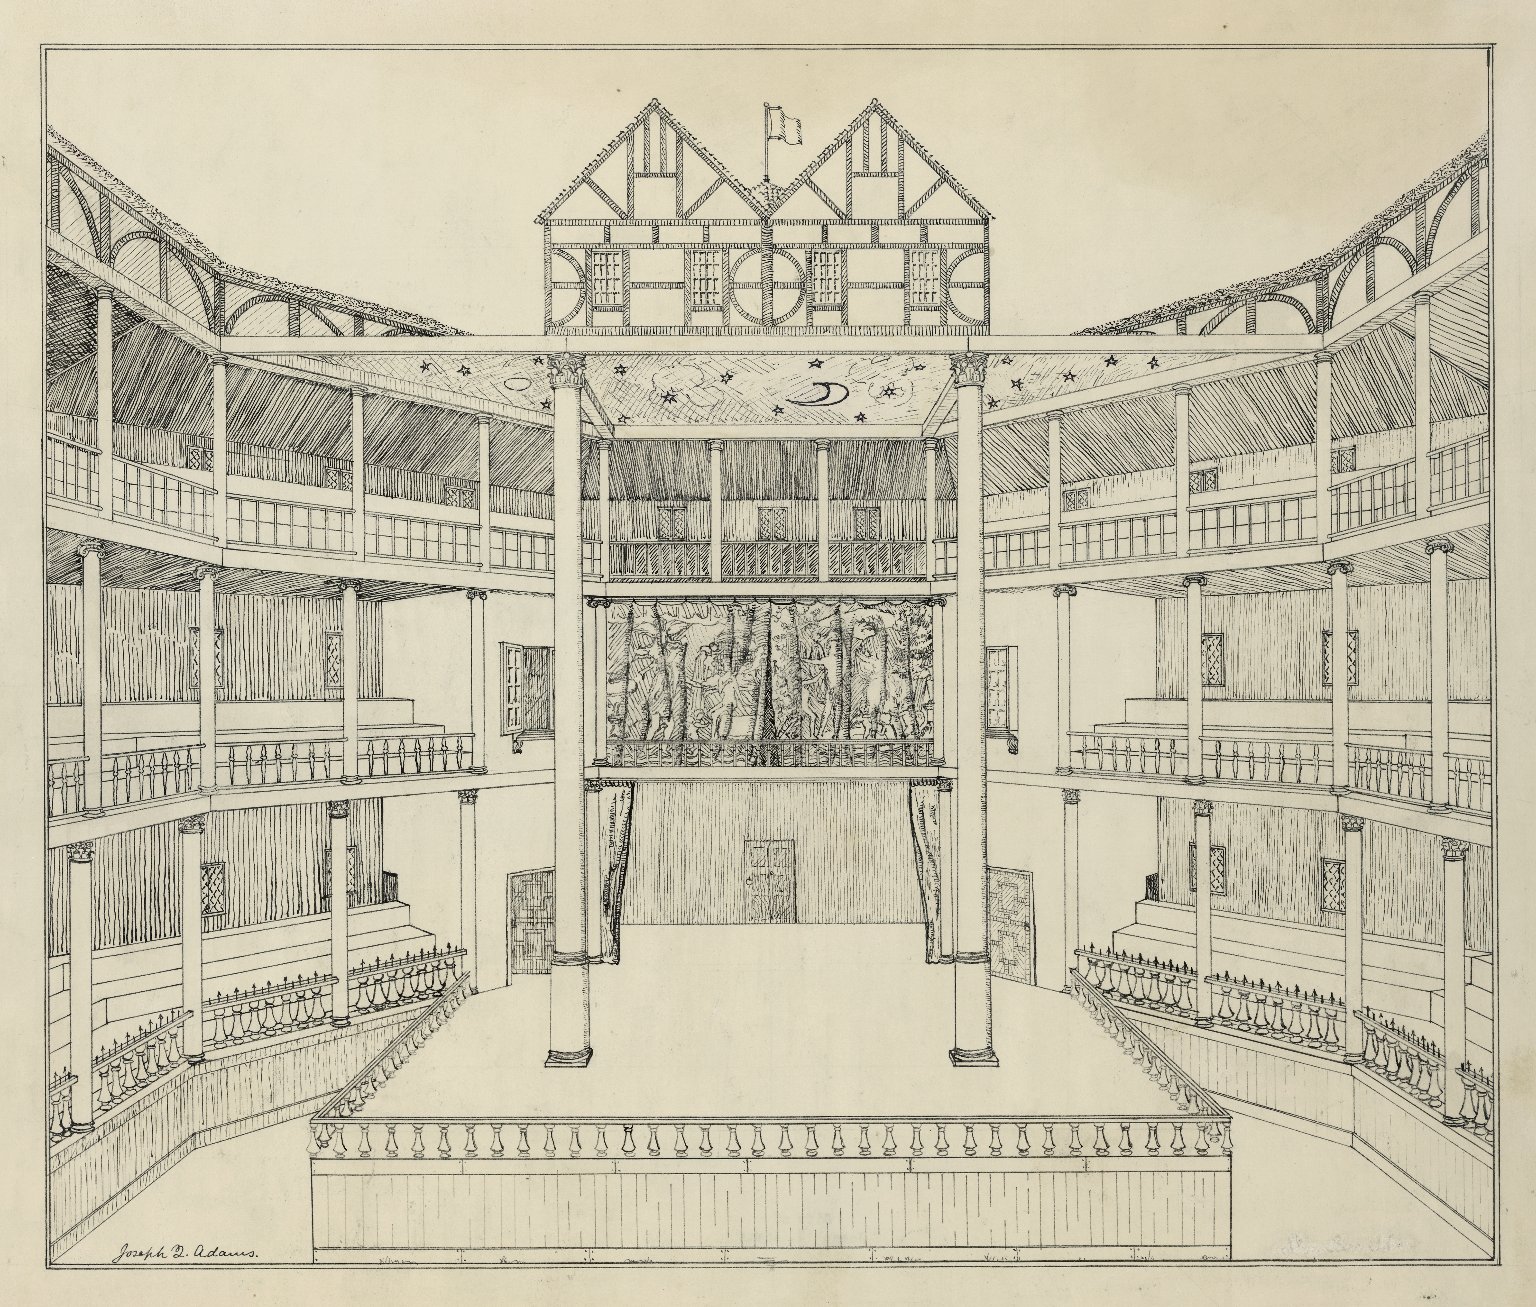 Conjectural, cut-away view of the interior of the Globe by Joseph Quincy Adams. Image courtesy of the Folger Digital Image Collection.